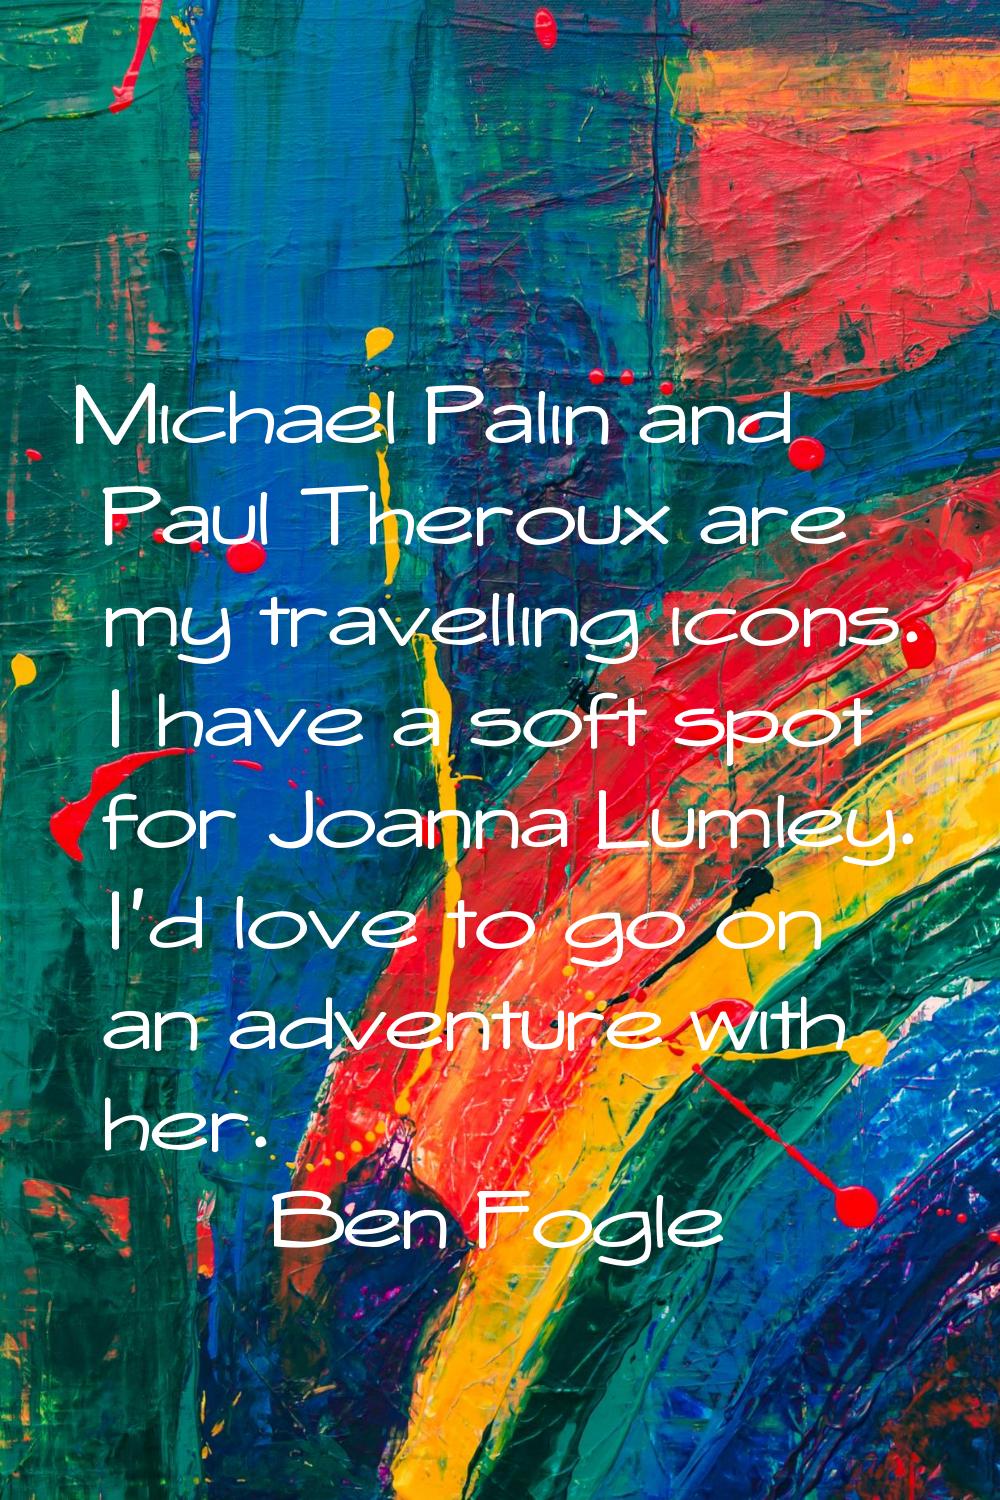 Michael Palin and Paul Theroux are my travelling icons. I have a soft spot for Joanna Lumley. I'd l